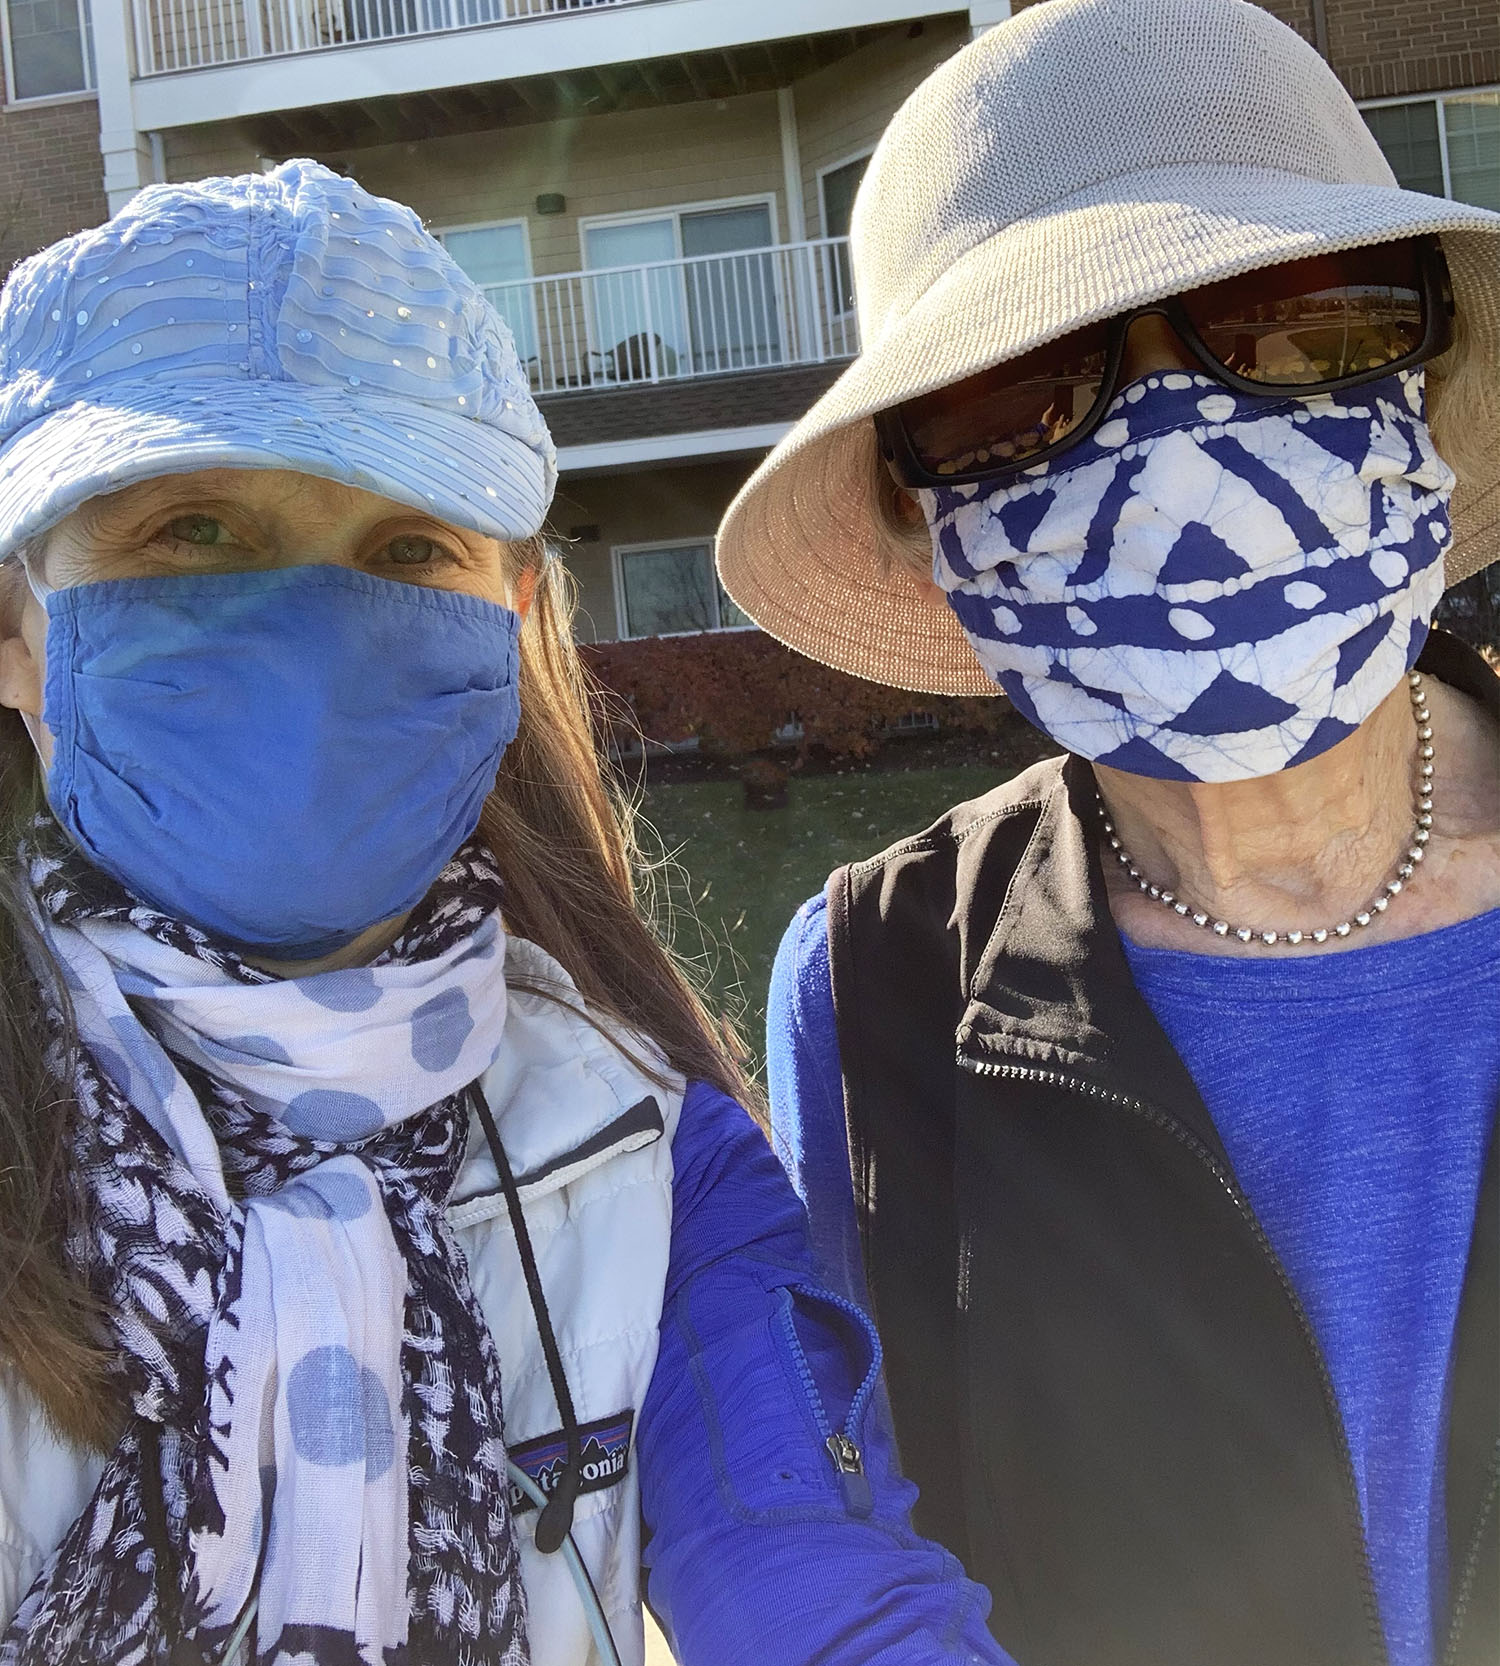 My mom and me with masks during the Covid-19 pandemic